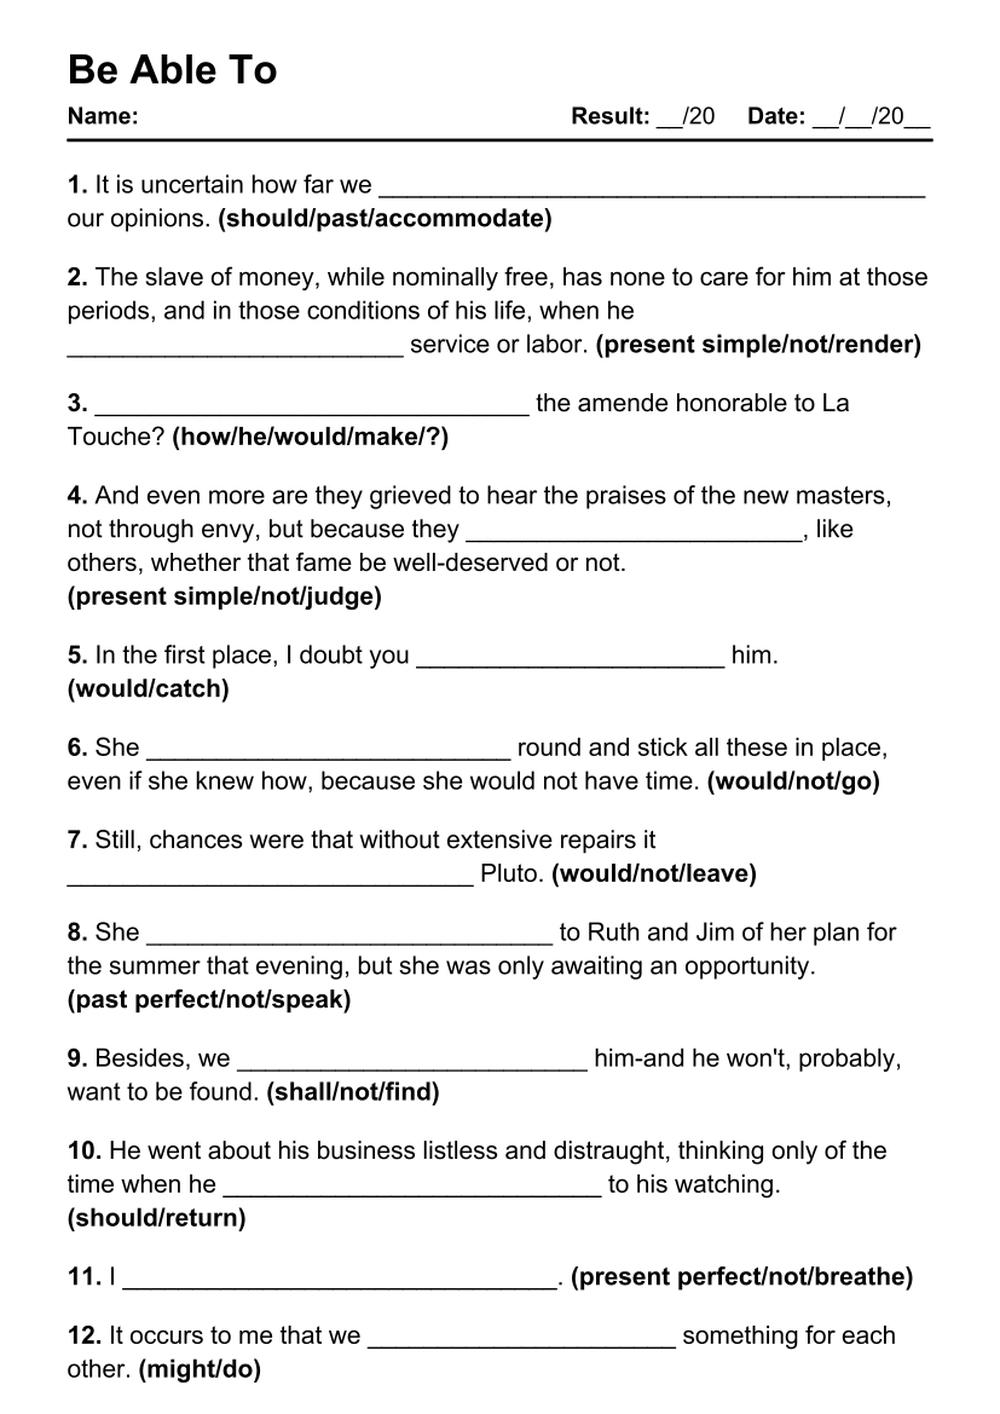 Printable Be Able To Exercises - PDF Worksheet with Answers - Test 38